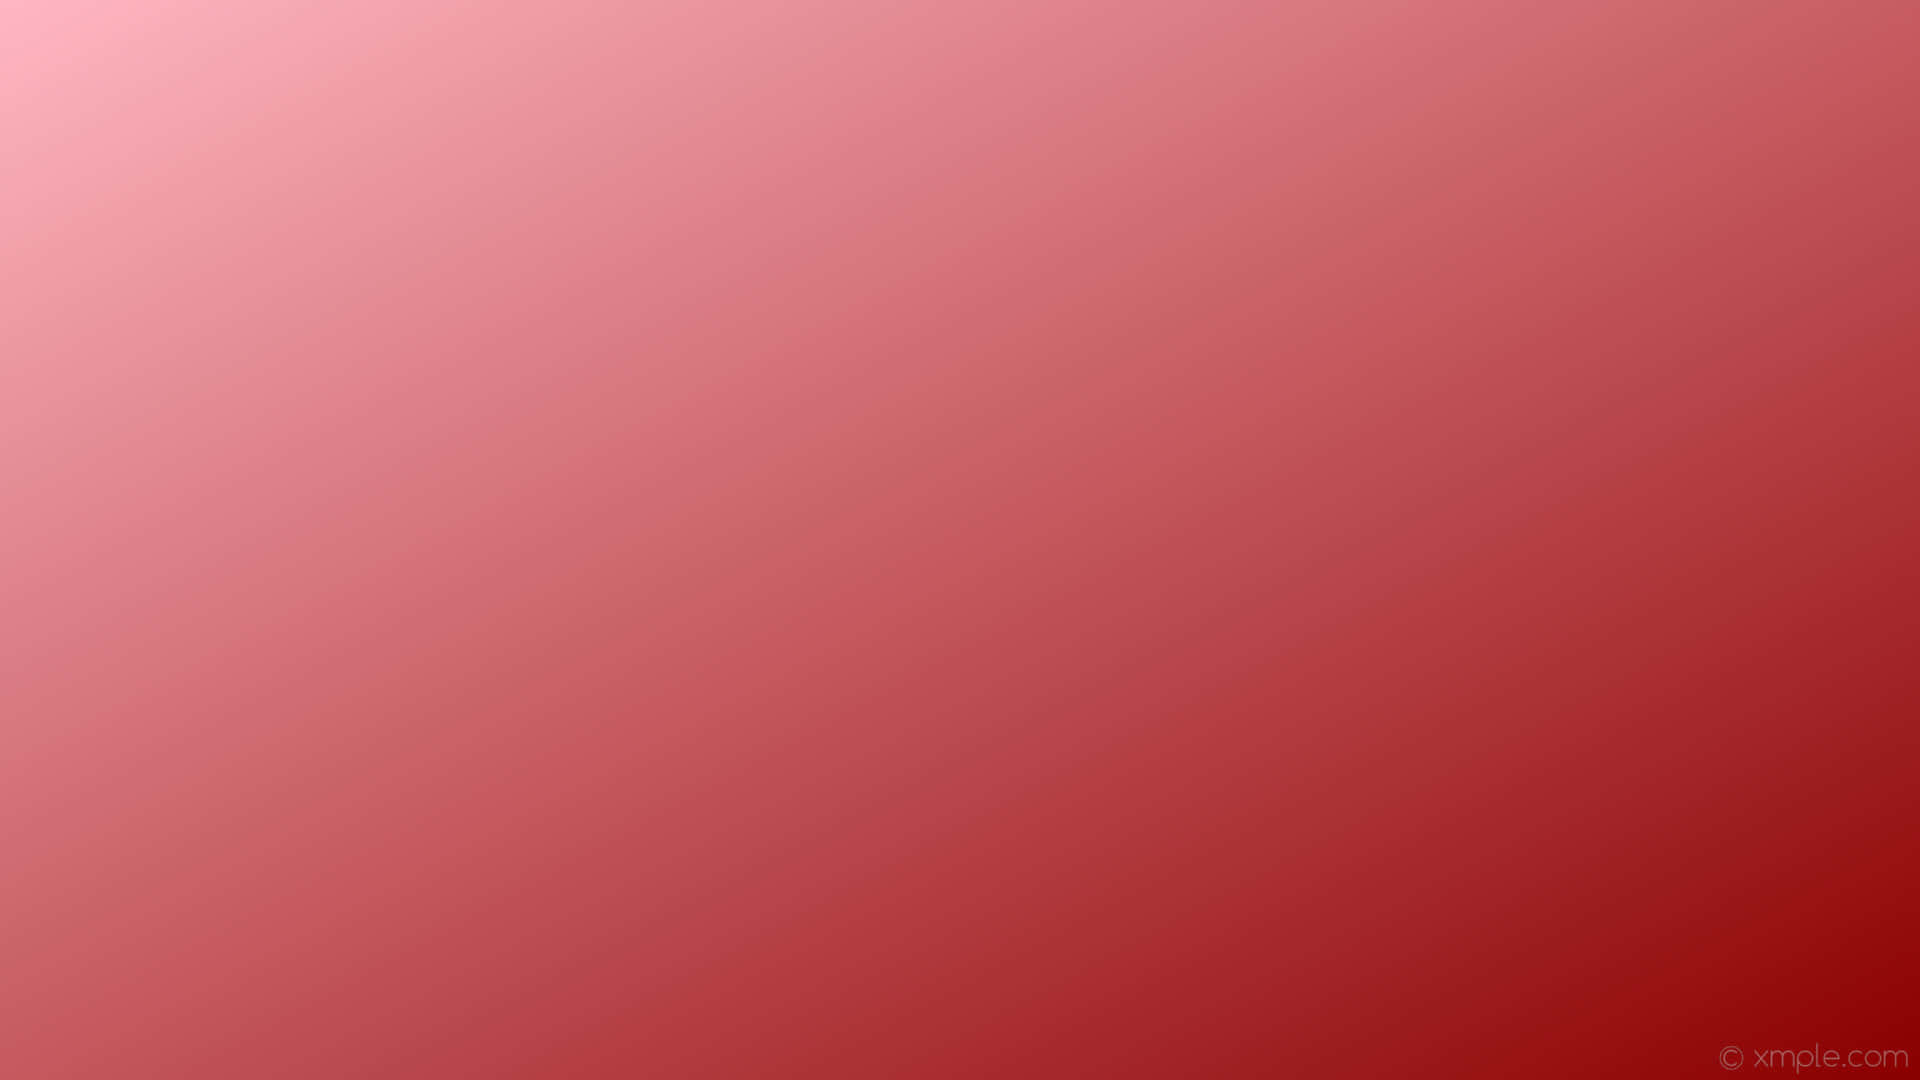 Solid Color Red Gradient Background